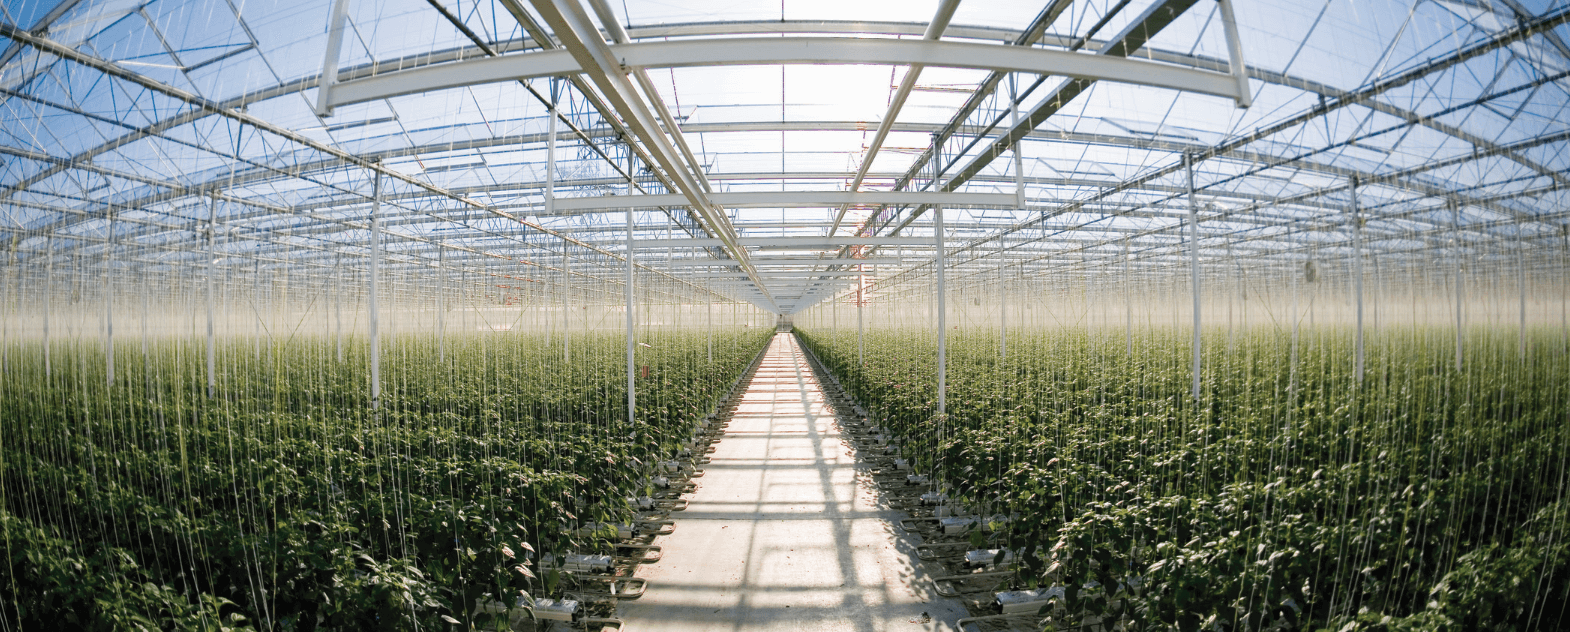 Greenhouse & Soilless Solutions – Reliable Solutions to Achieve Highest Quality Yield